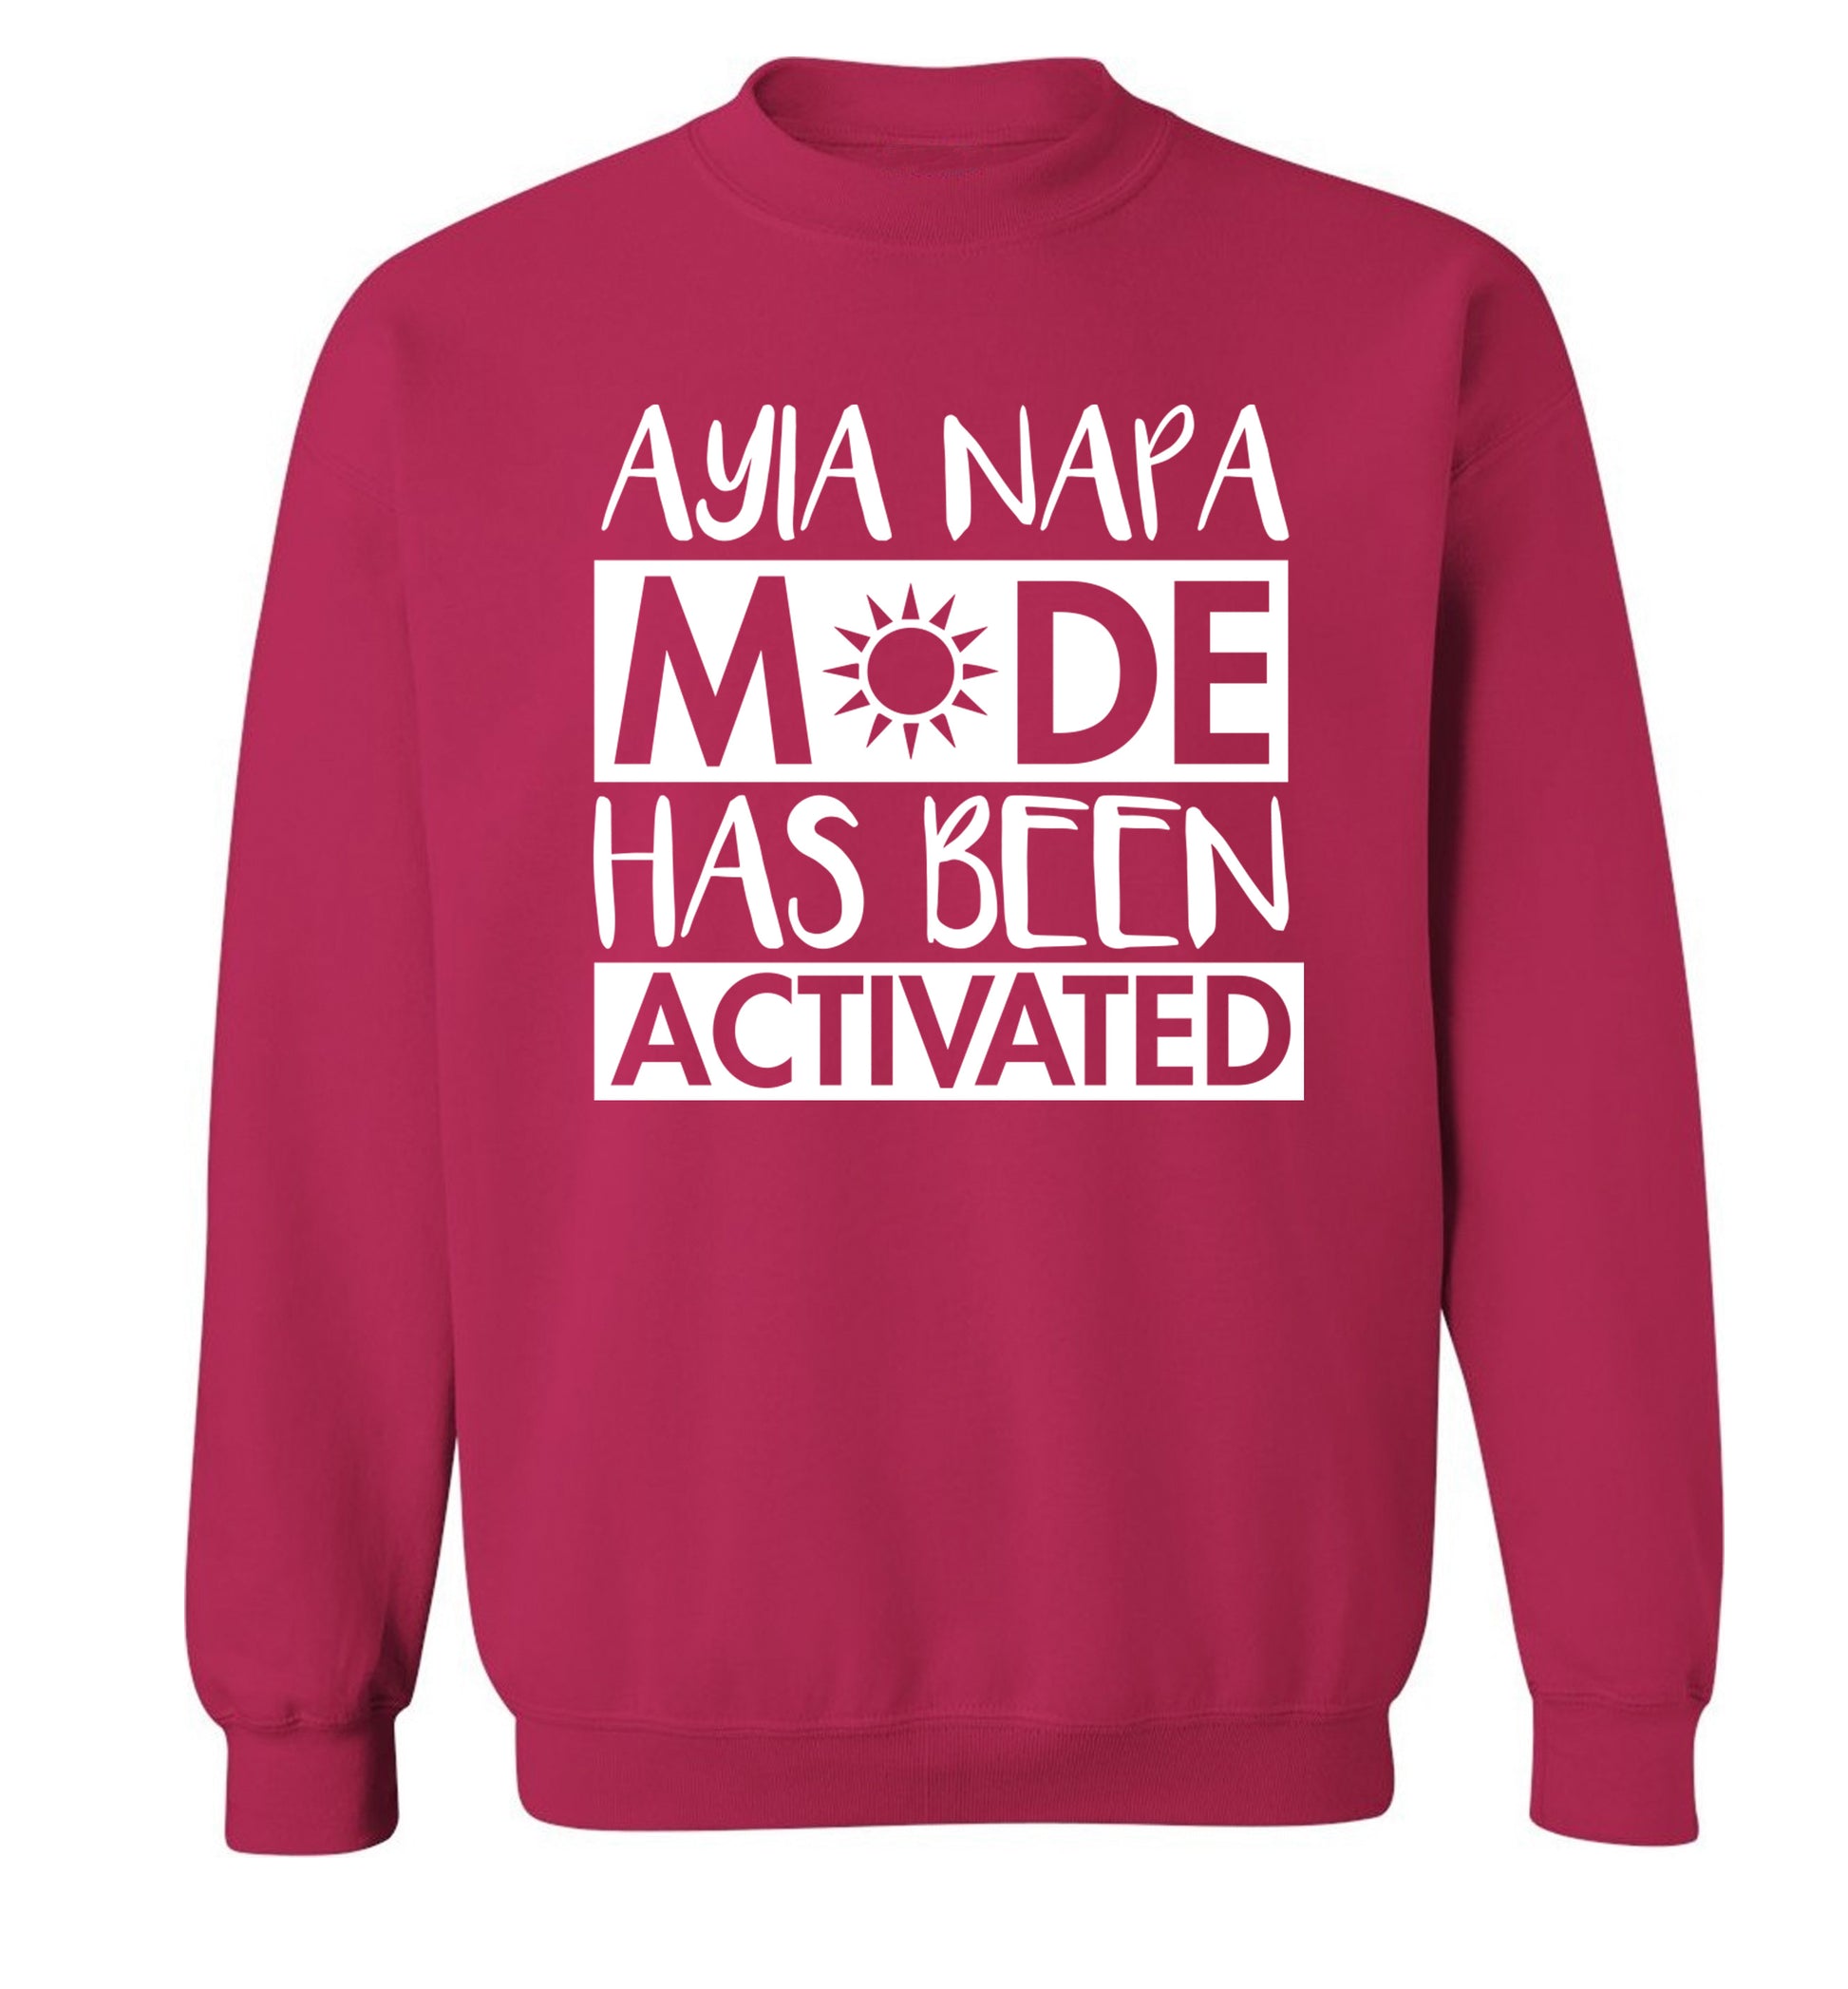 Ayia Napa mode has been activated Adult's unisex pink Sweater 2XL